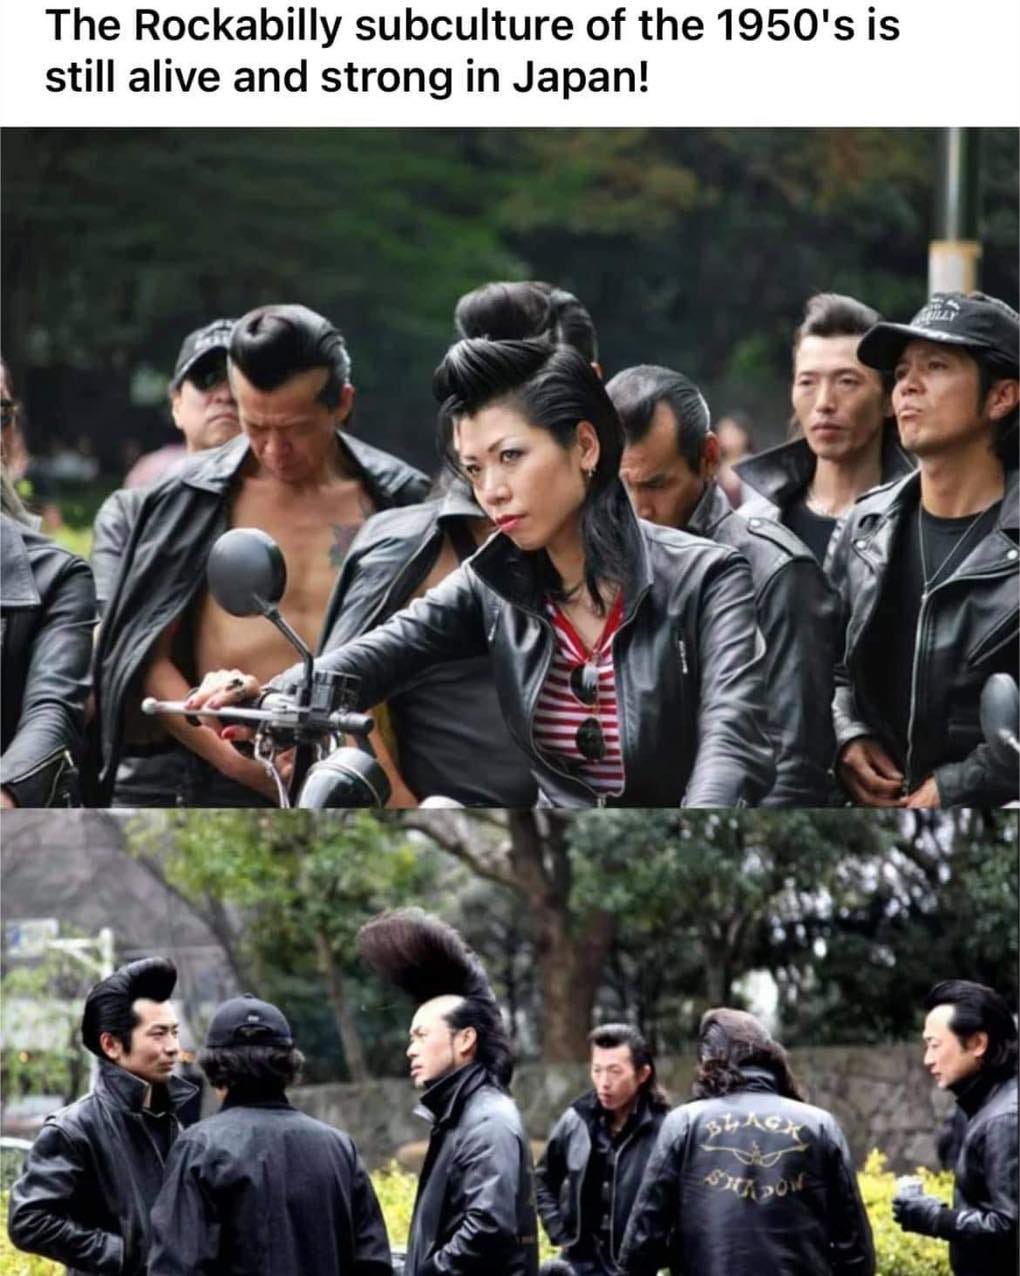 May be an image of 11 people, people standing, outdoors and text that says 'The Rockabilly subculture of the 1950'sis still alive and strong in Japan! BL人CR'